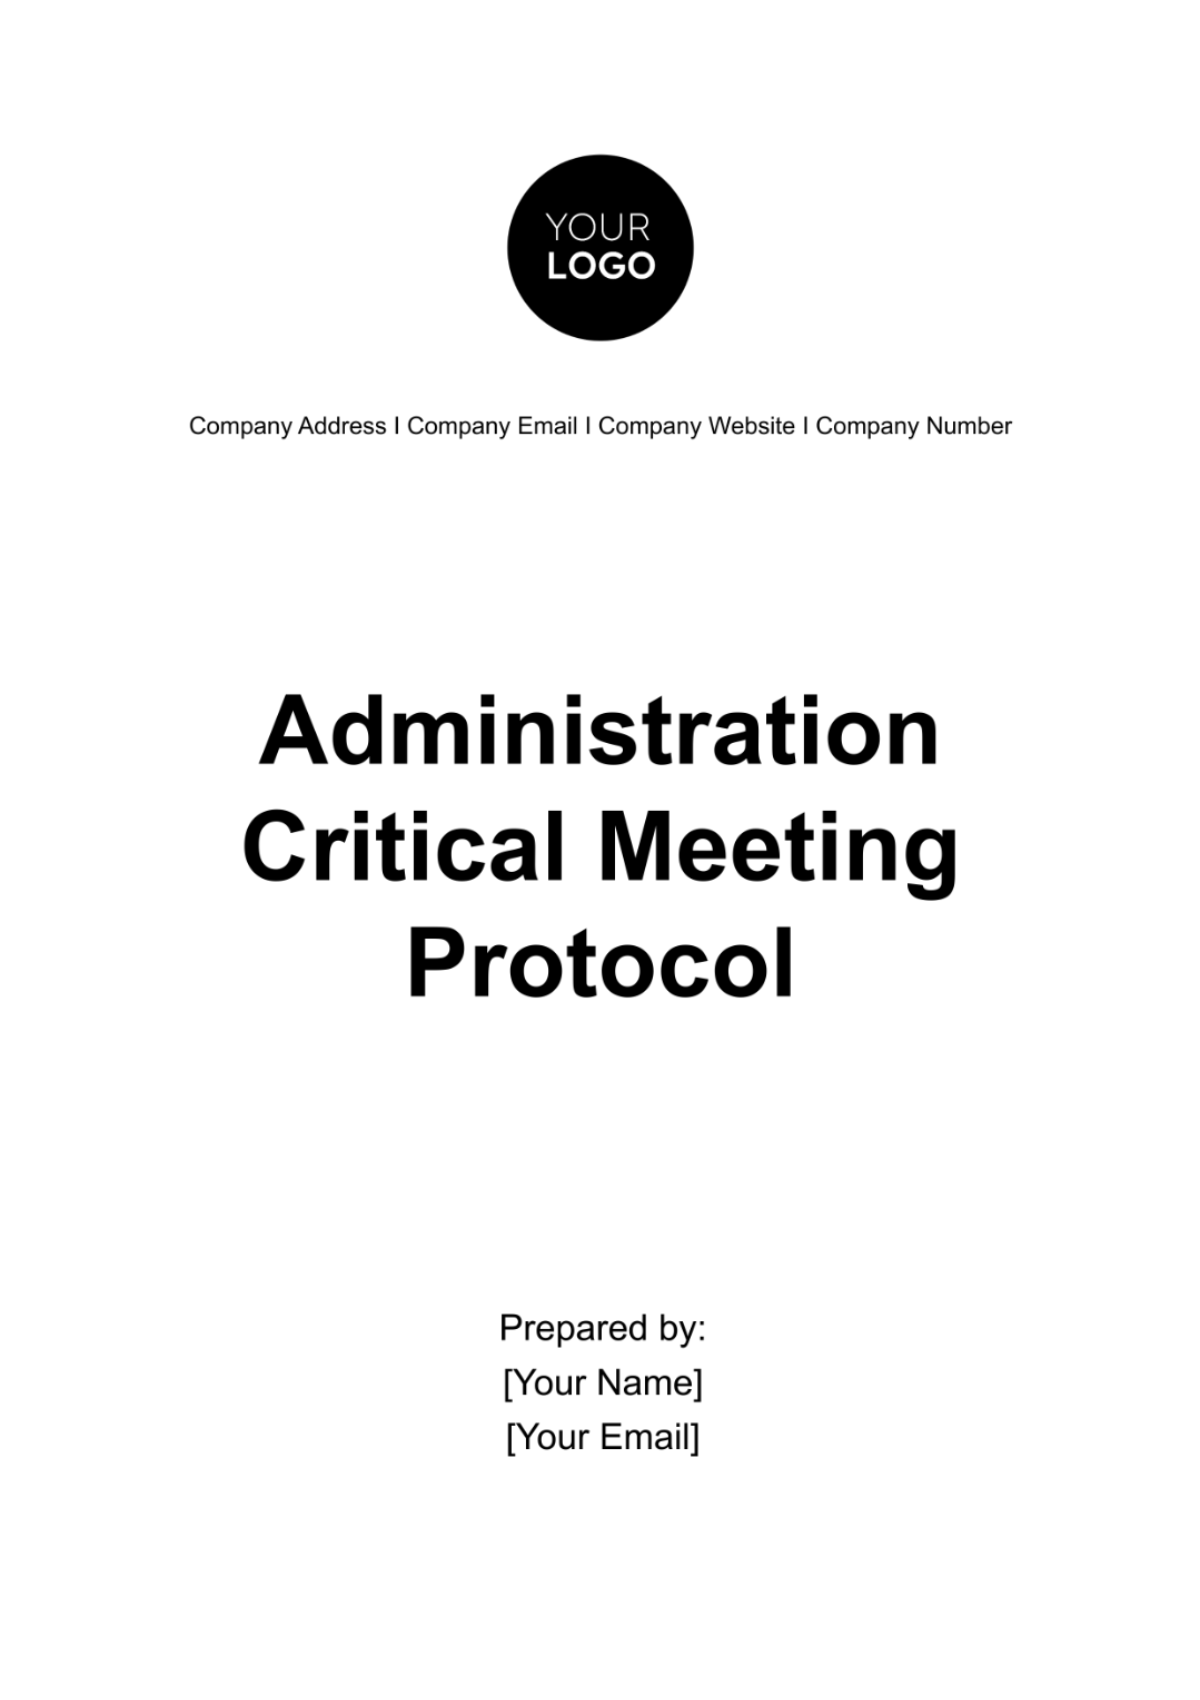 Administration Critical Meeting Protocol Template